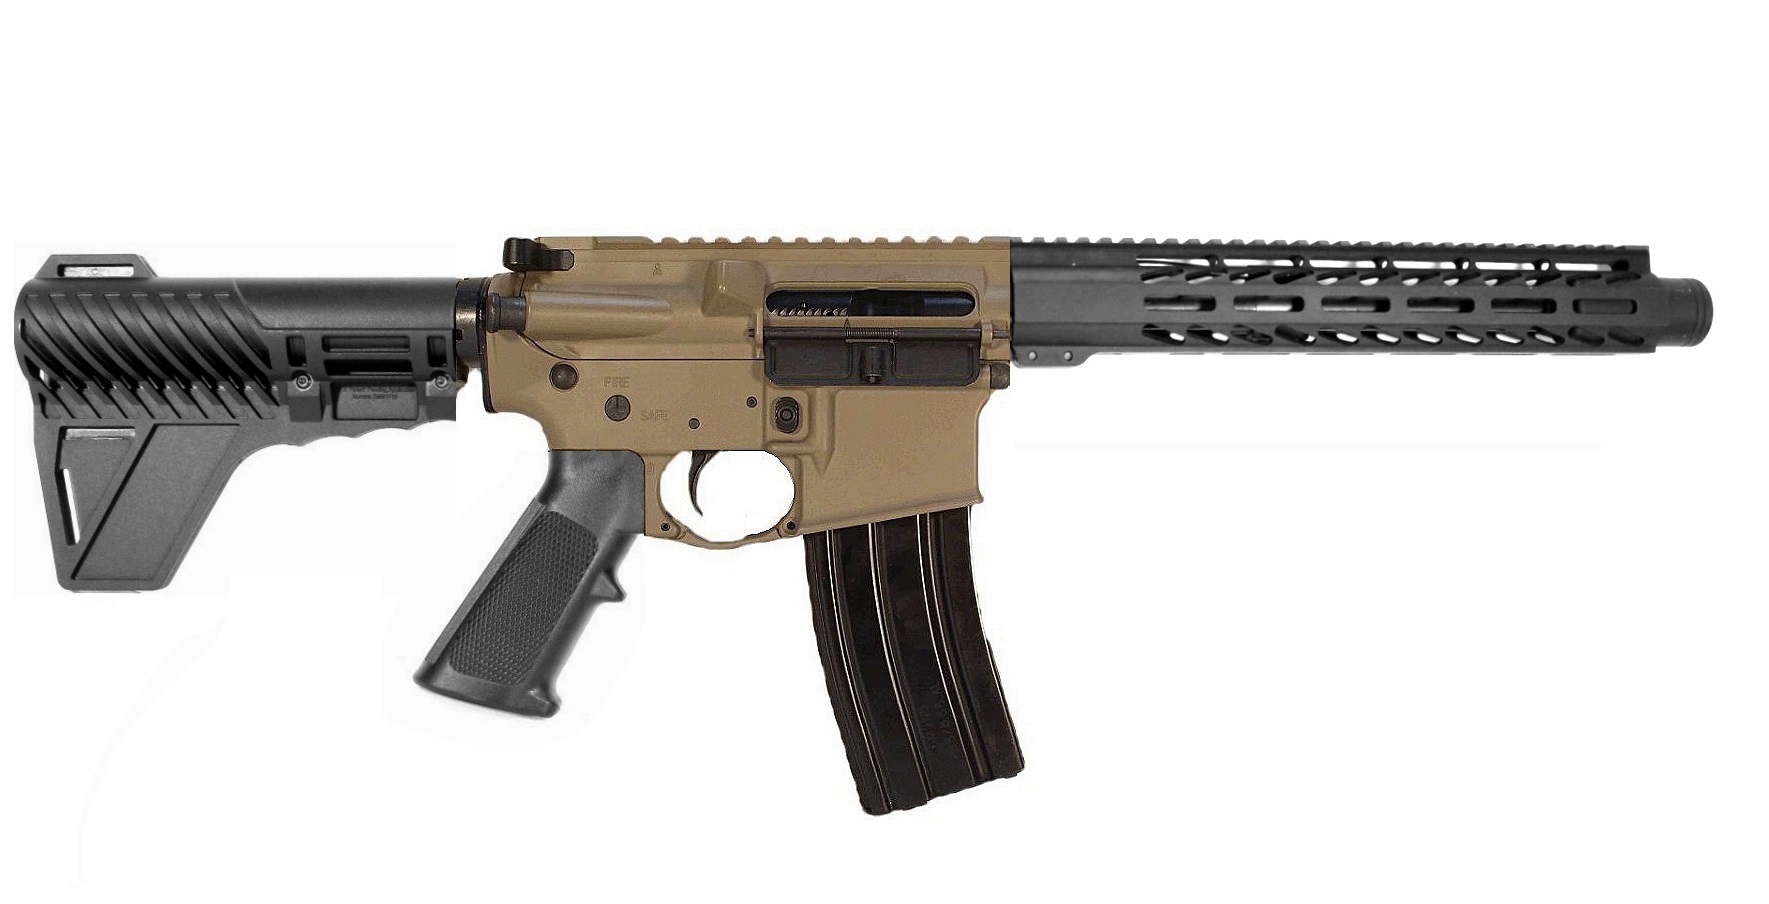 10.5 inch 300 Blackout AR Pistol | Fast Shipping | Quality Assurance